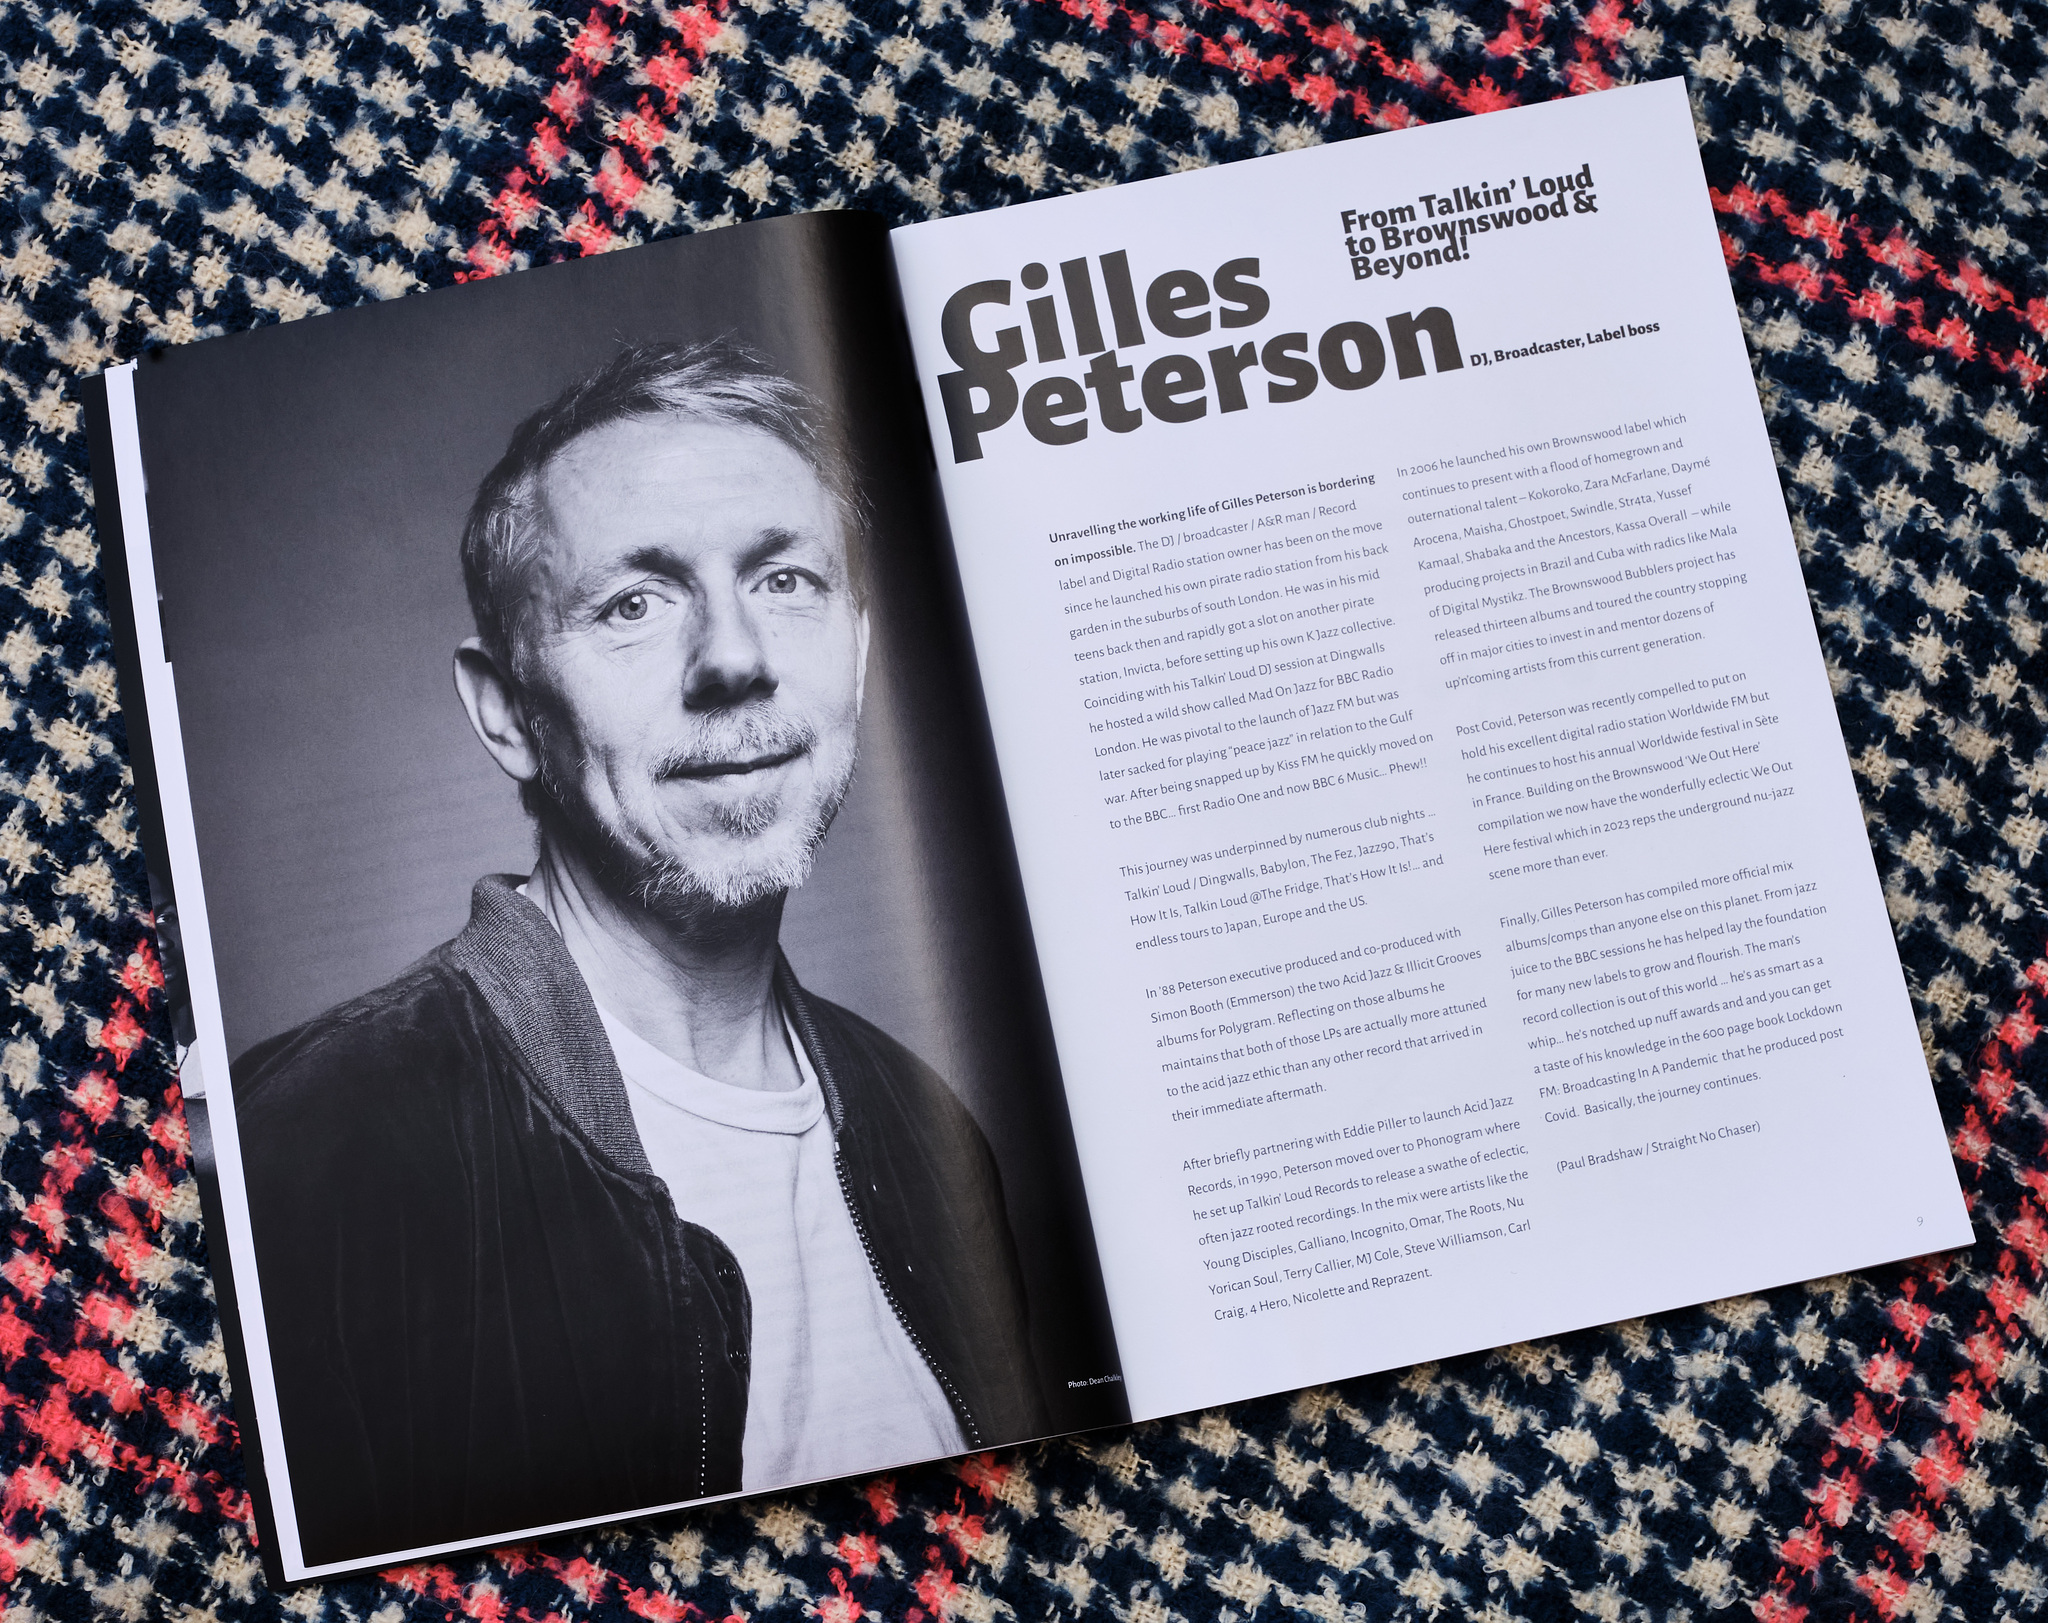 Gilles Peterson for the Acid Jazz & other Illicit grooves exhibition 